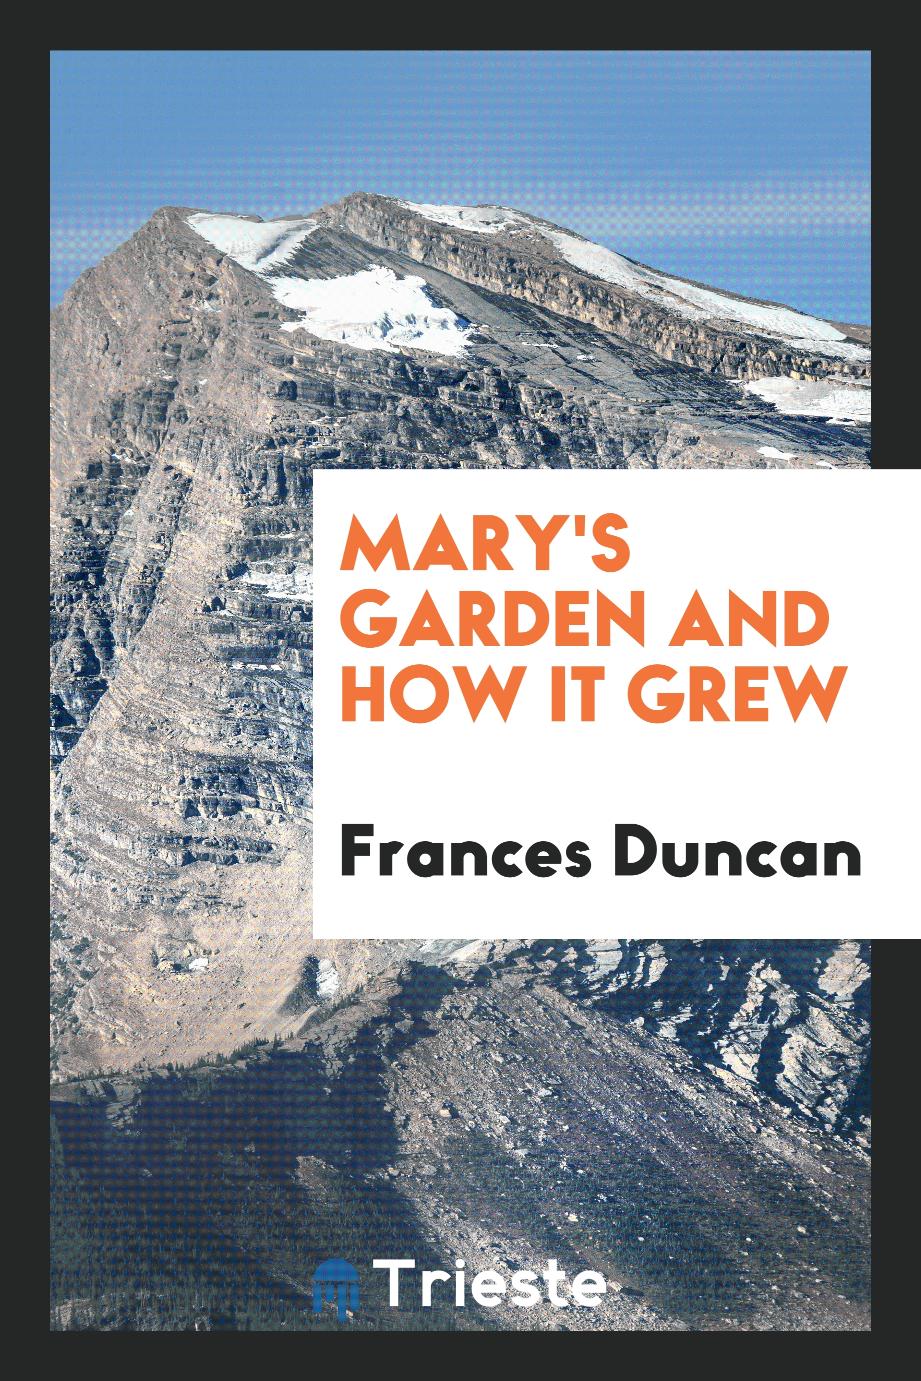 Mary's garden and how it grew